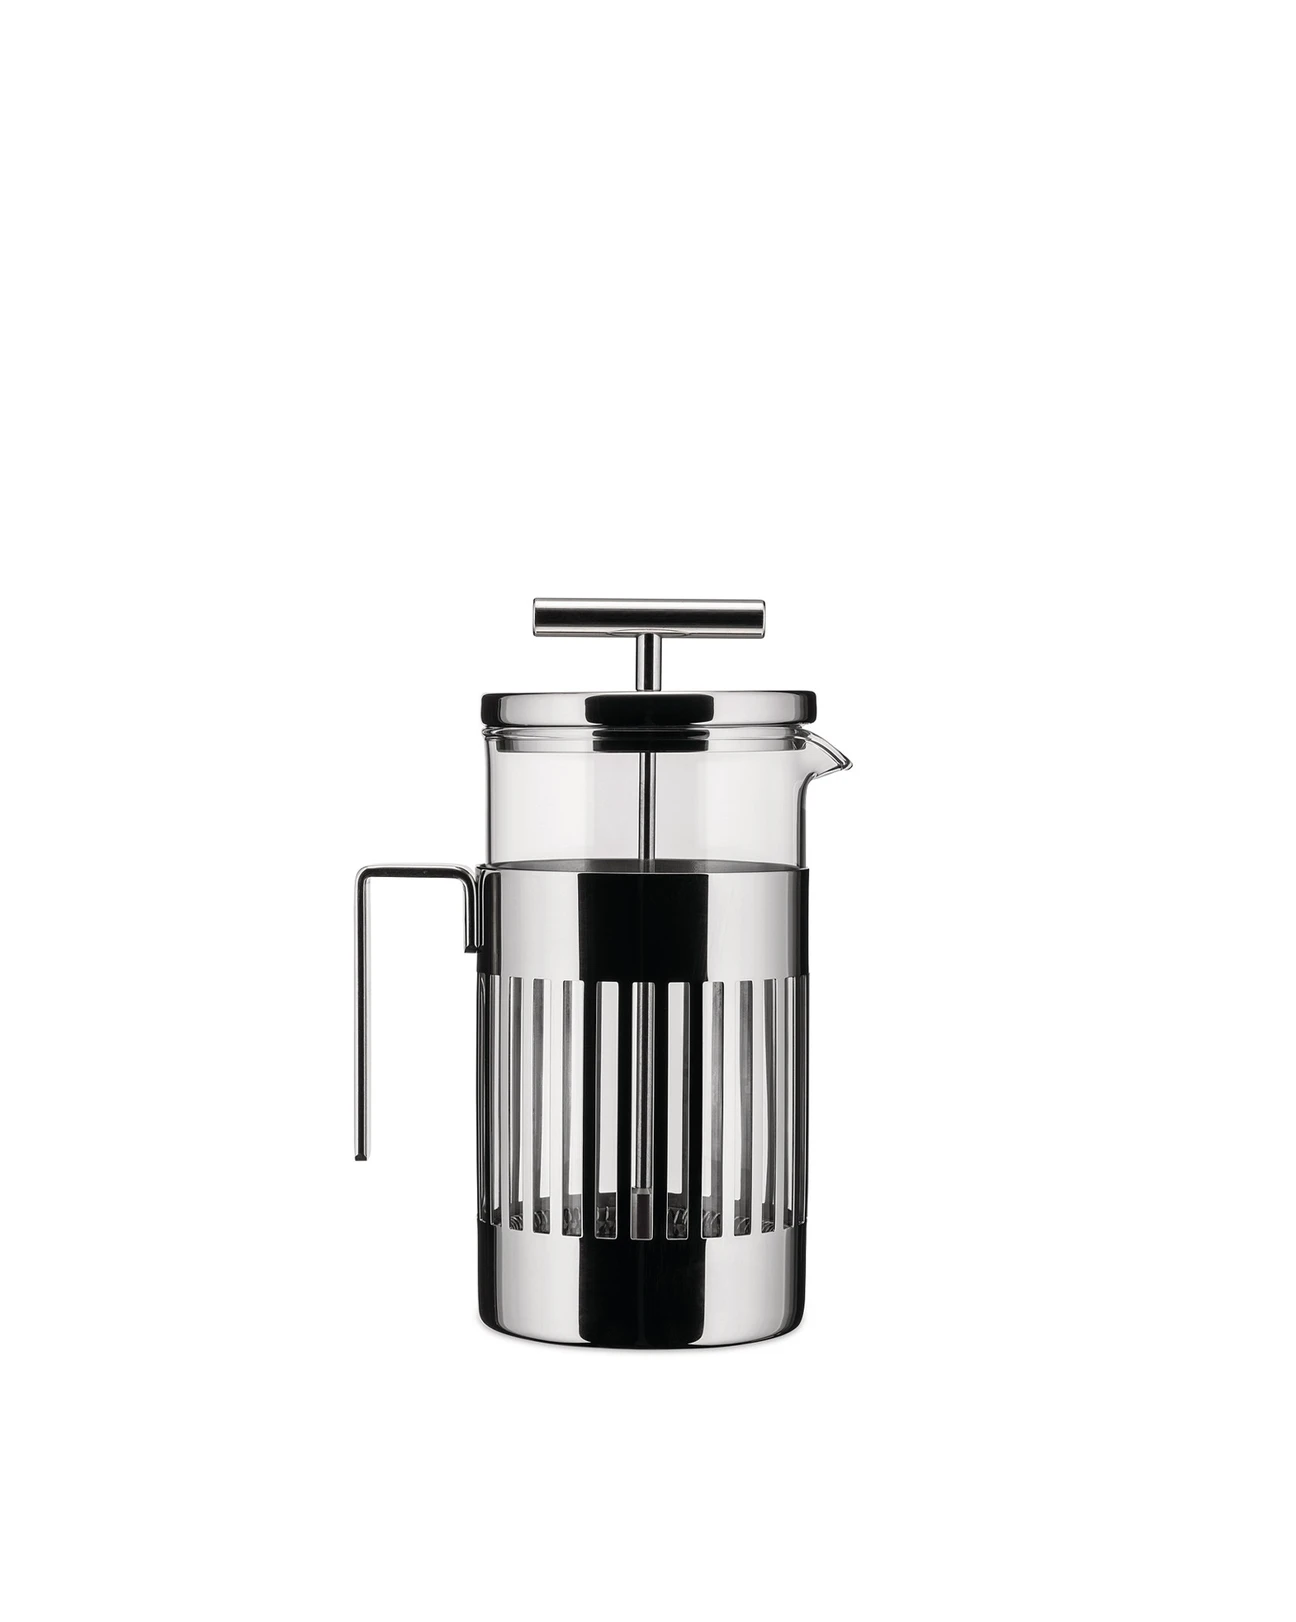 Alessi Press-filter coffee maker or infuser, 8 cups